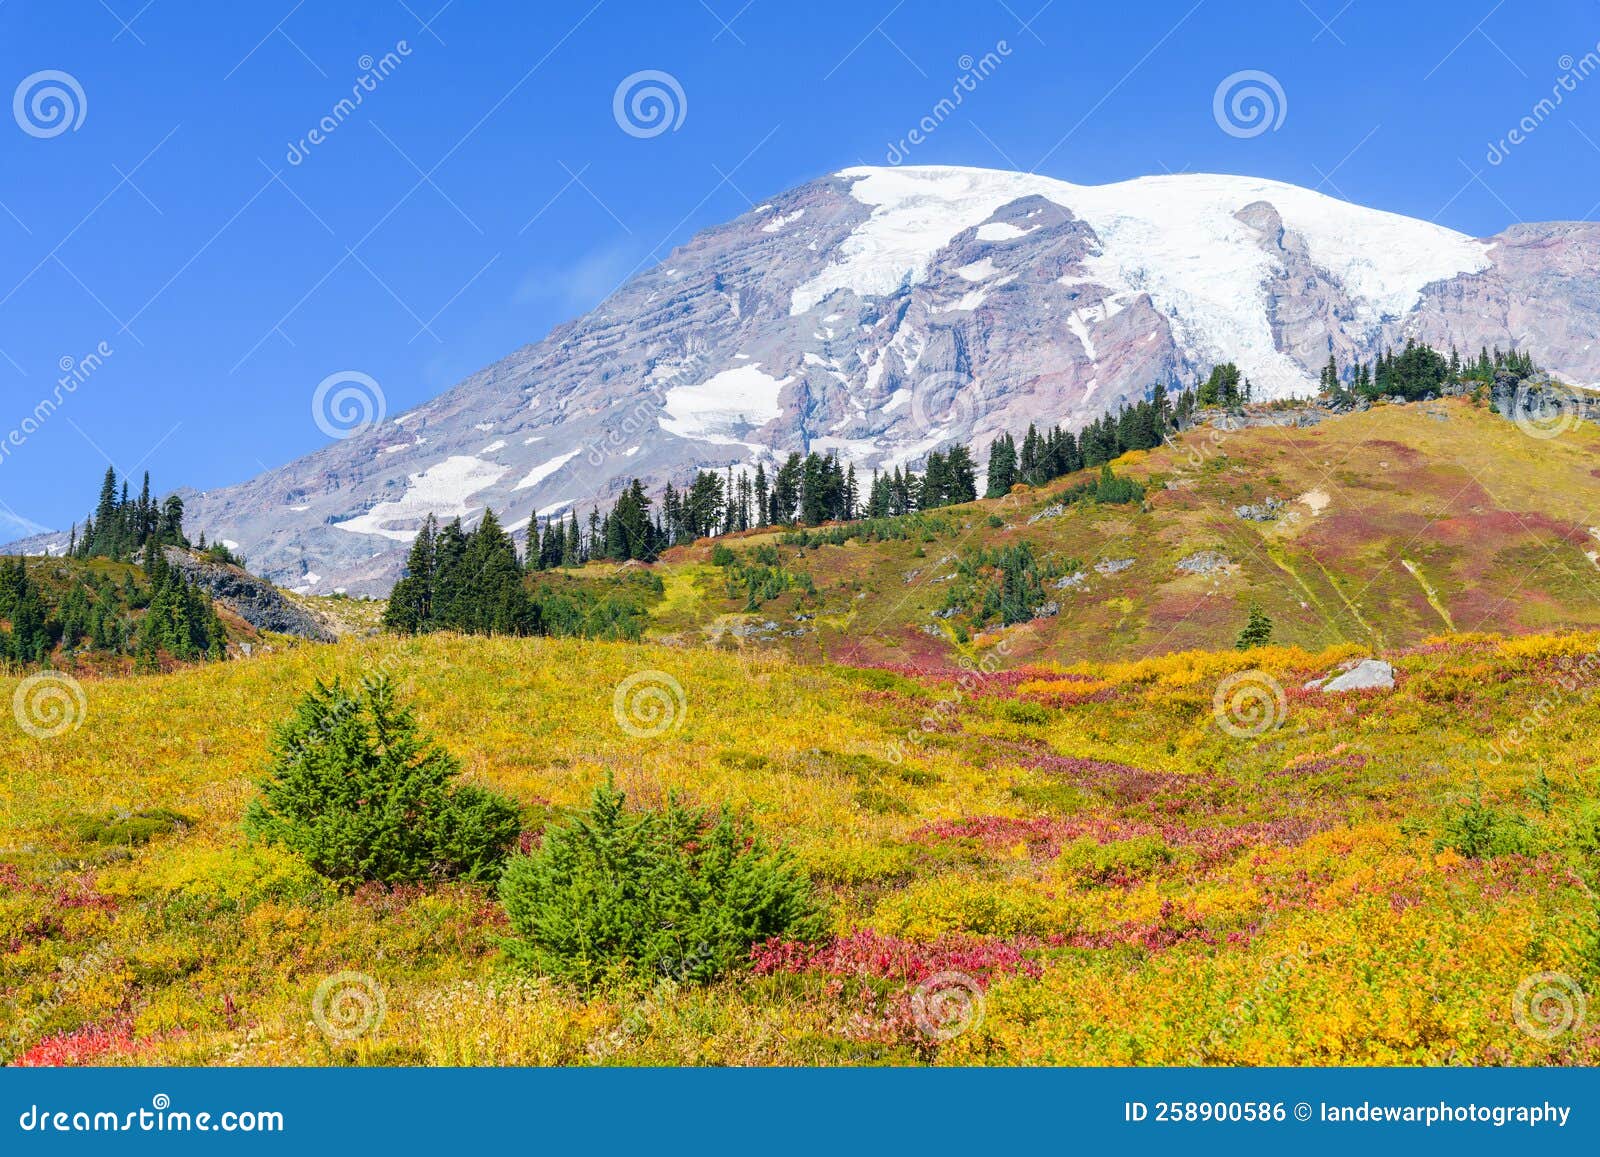 fall colors on the meadow slops of mount rainier national park